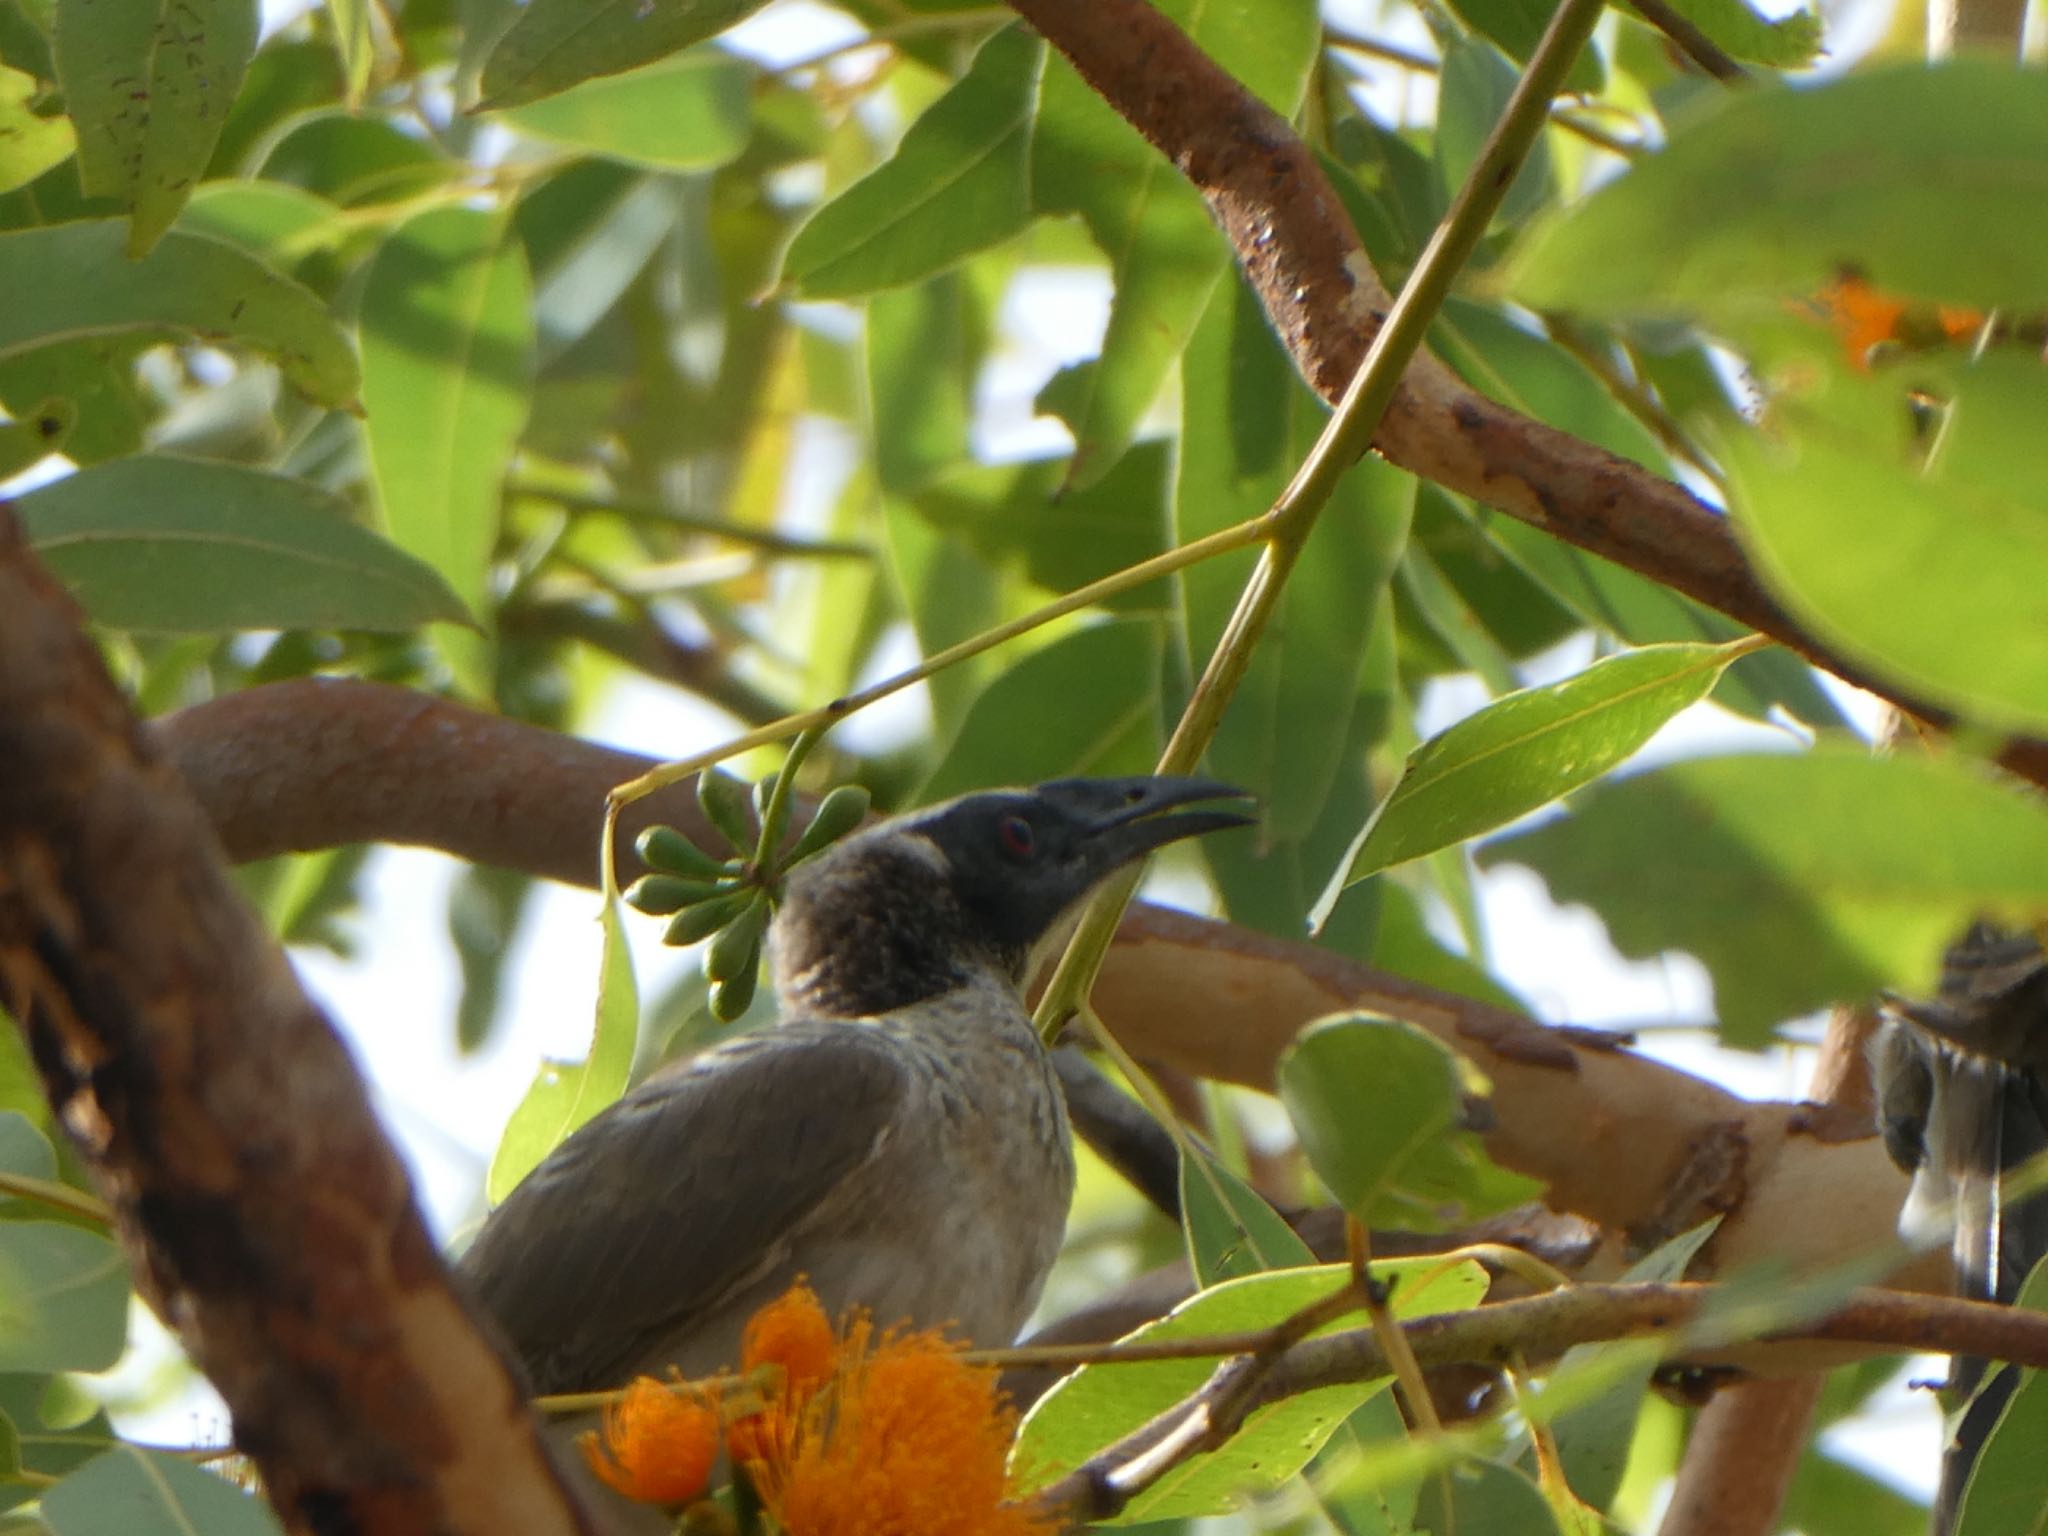 Photo of Silver-crowned Friarbird at Edith Falls, Nitmiluk National Park, NT, Australia by Maki